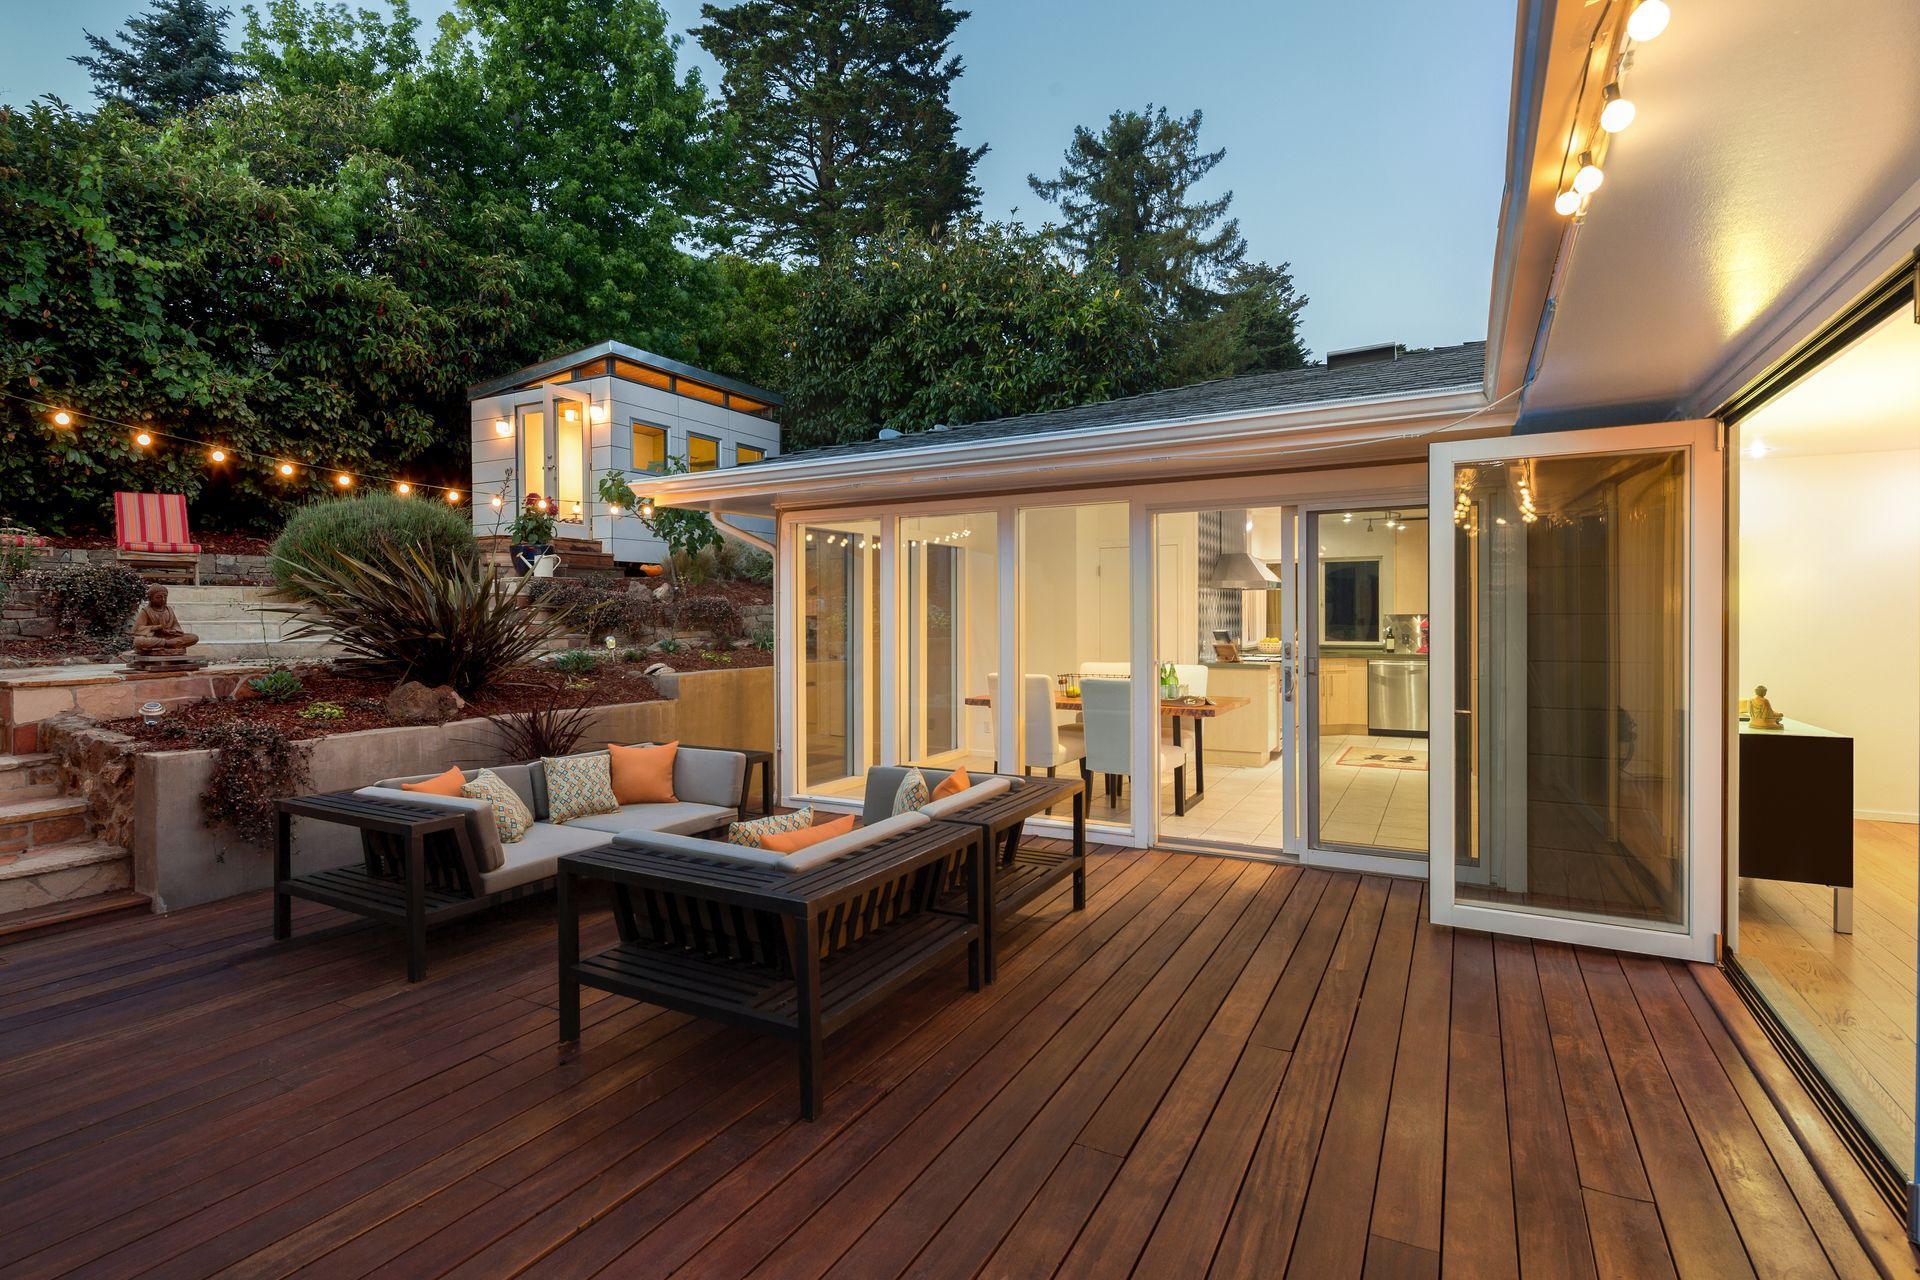 A breathtaking wooden deck illuminated by the warm glow of twilight.